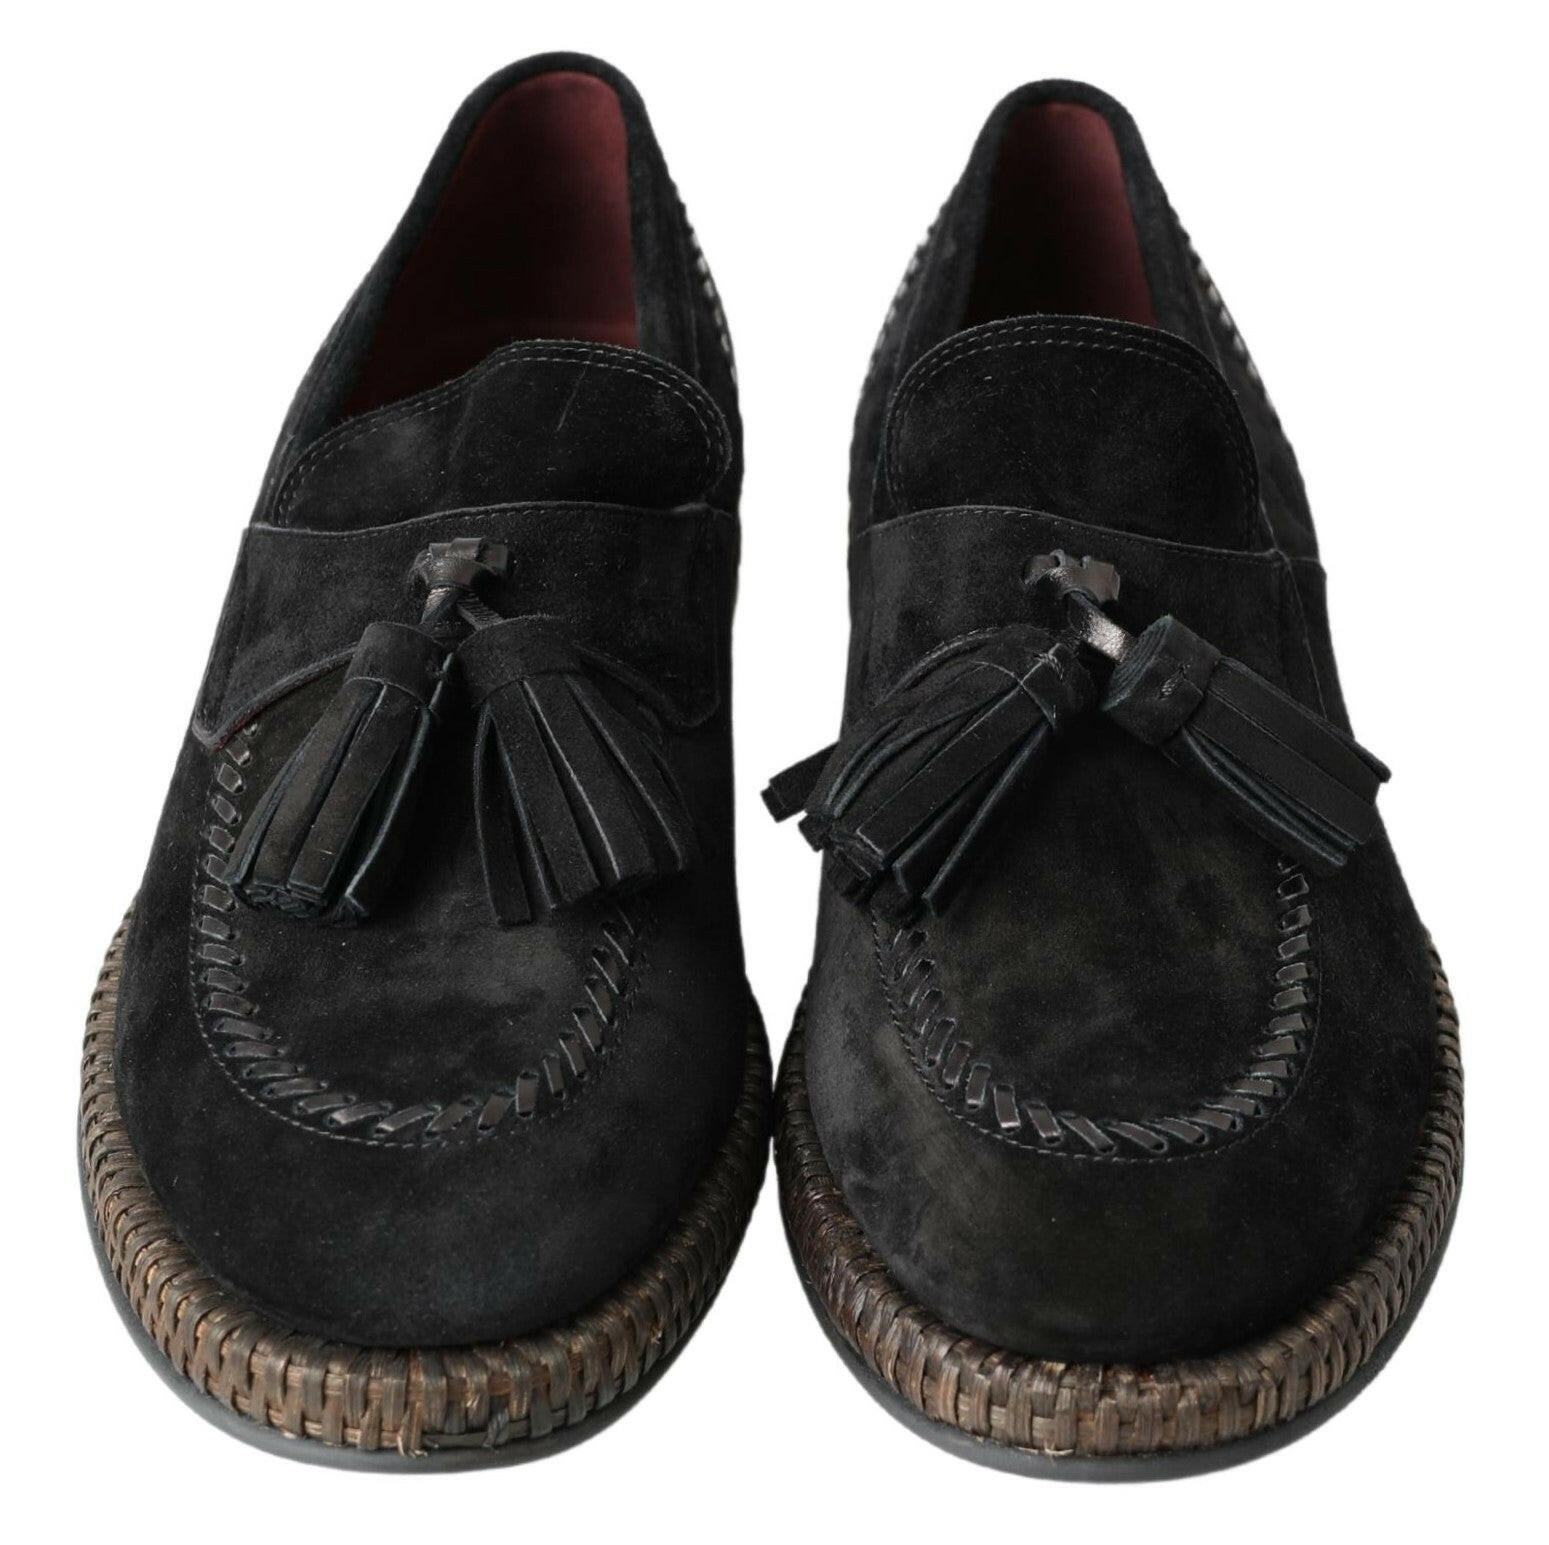 Dolce & Gabbana Black Suede Leather Casual Espadrille Shoes - GENUINE AUTHENTIC BRAND LLC  